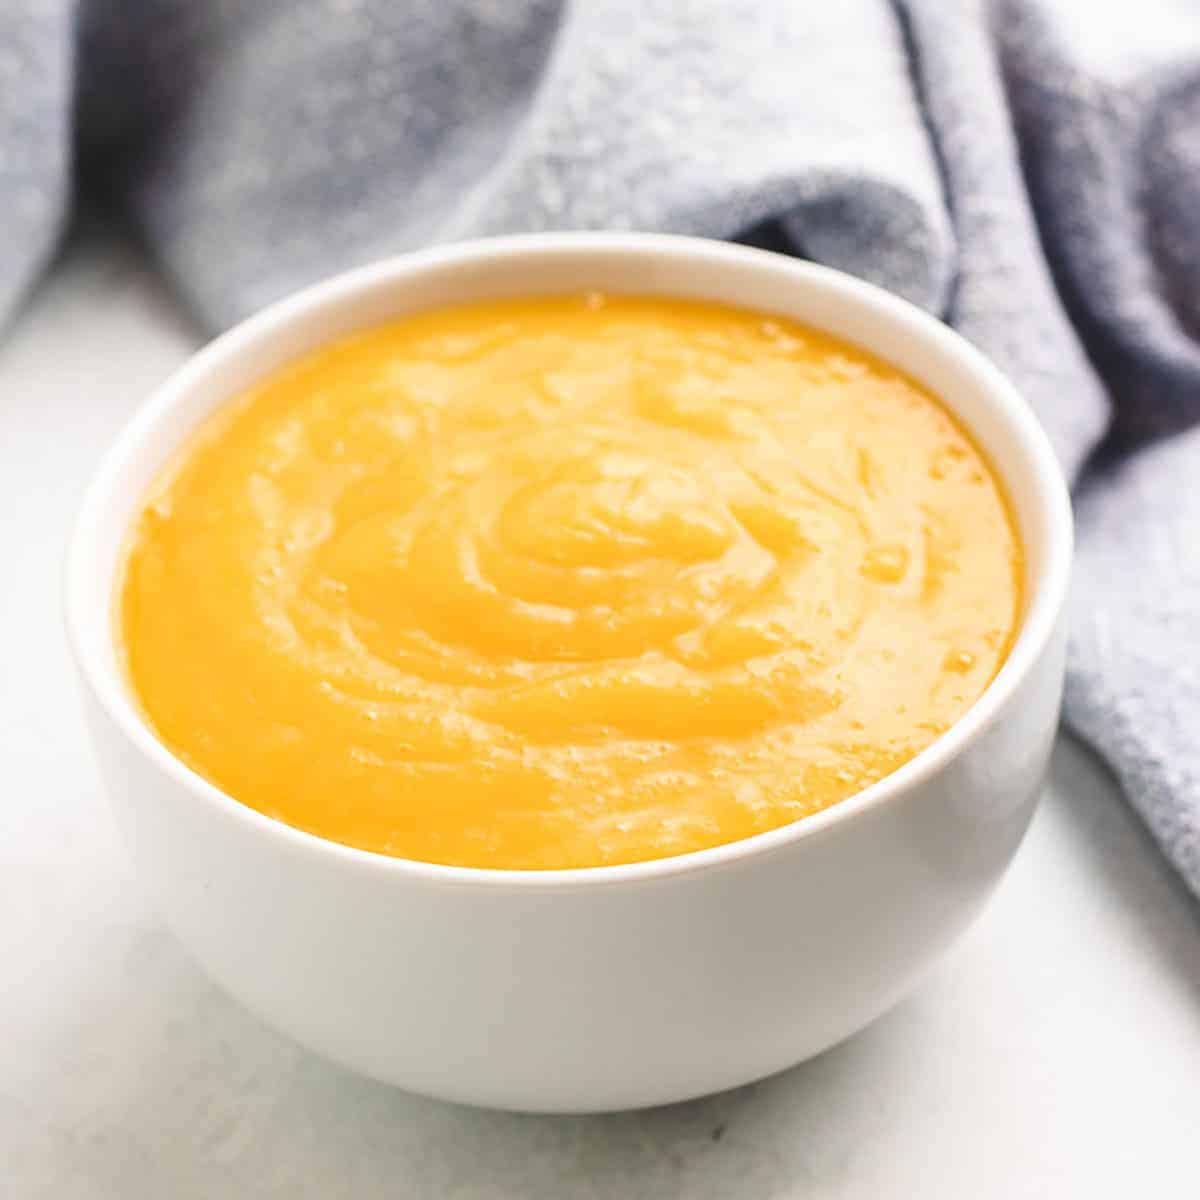 The finished mango puree in a bowl.